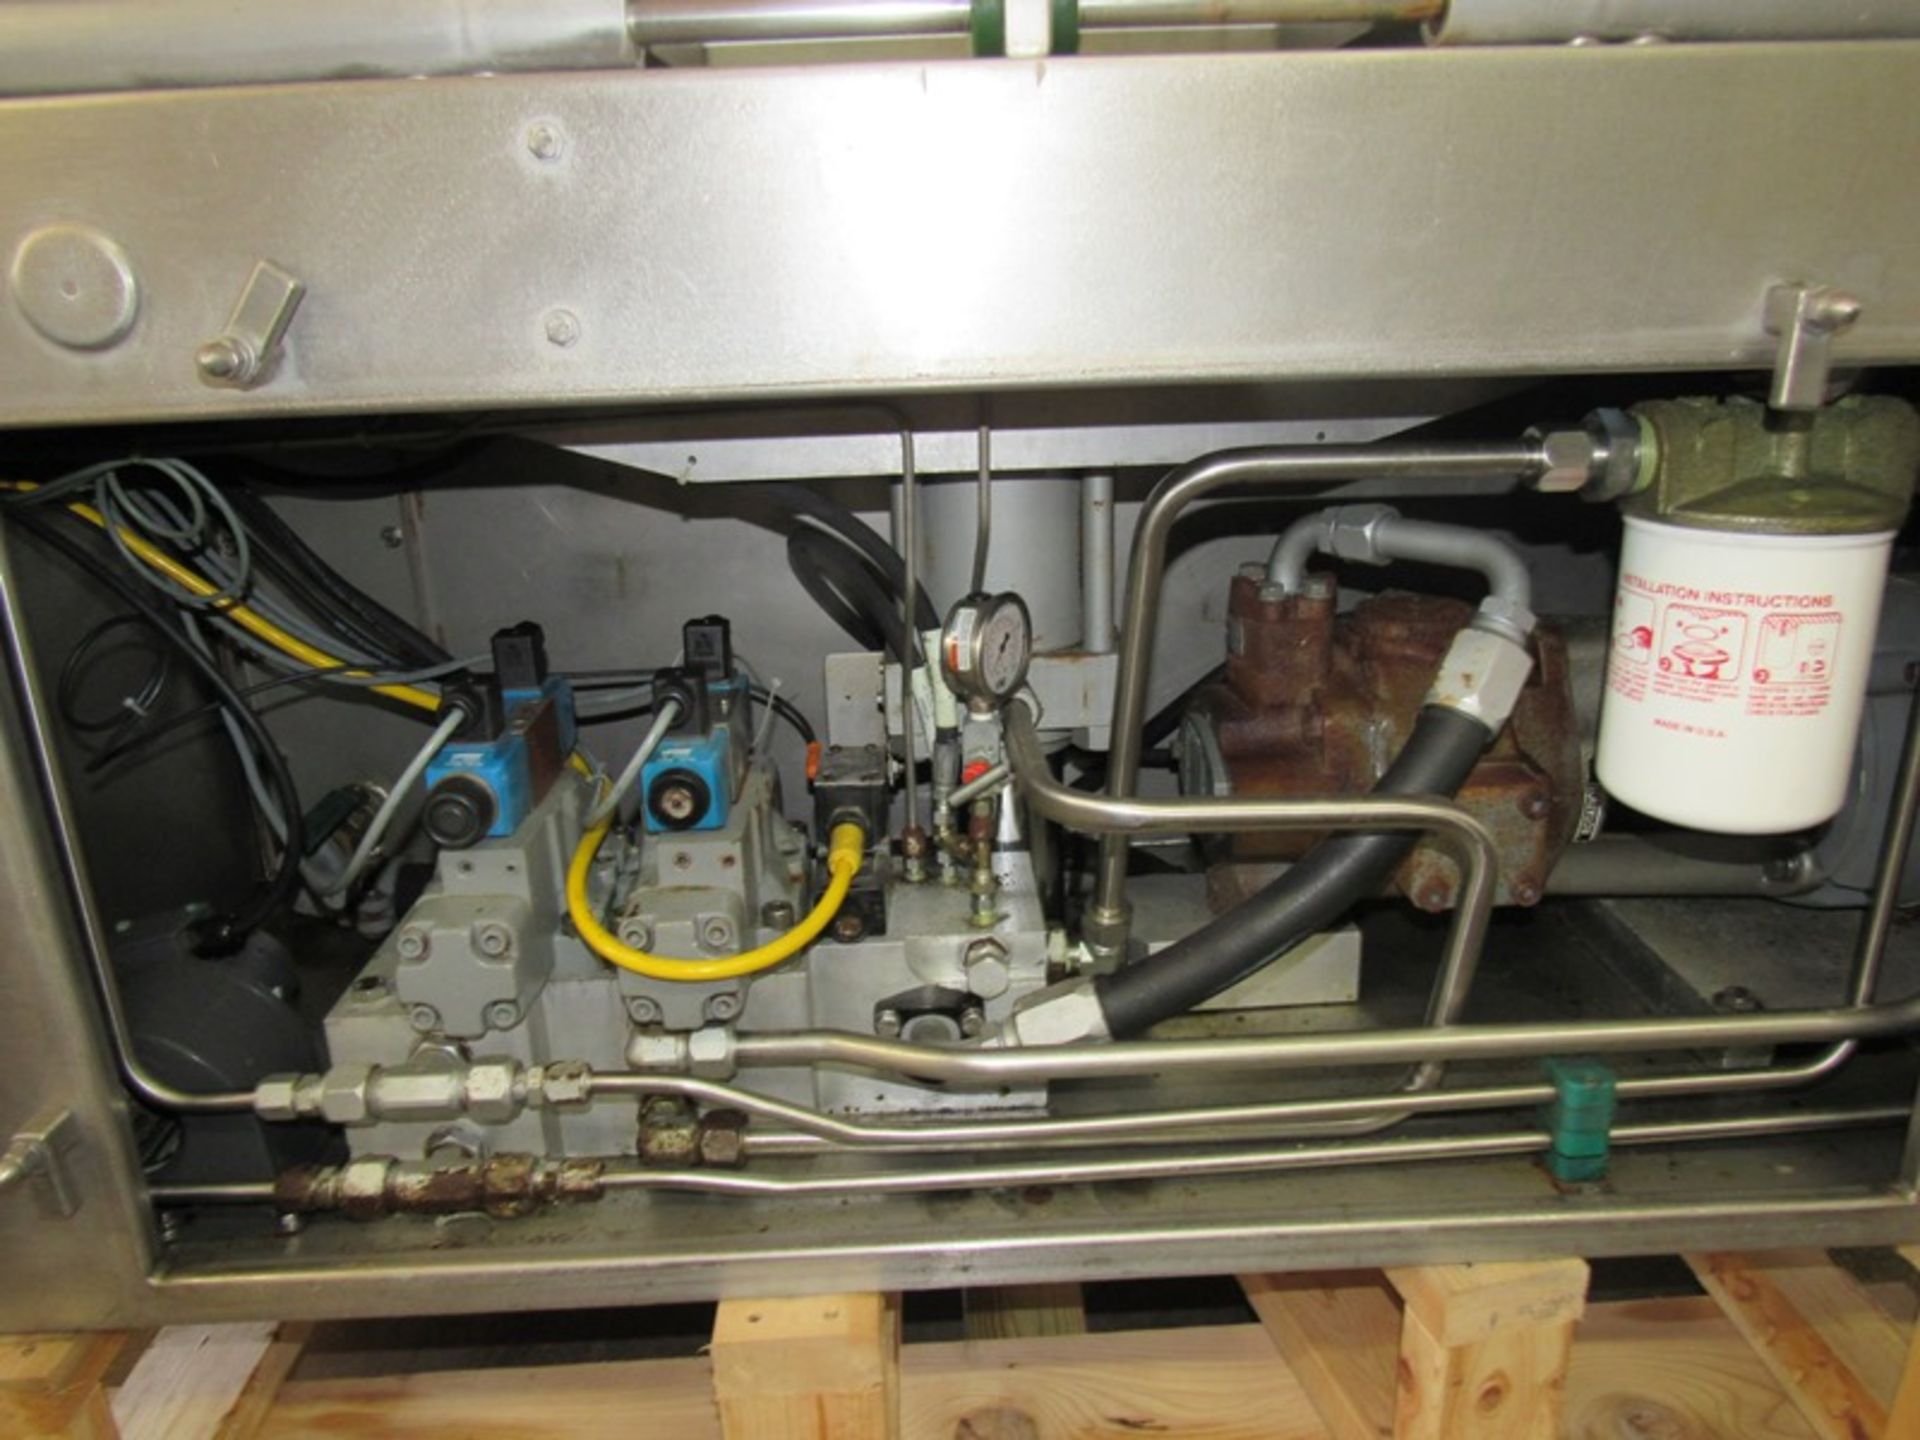 Ross Mdl. 914 Meat Press, Ser. #1230, 220 volts, 3 phase, no die (Located In Sandwich, IL ) - Image 5 of 9